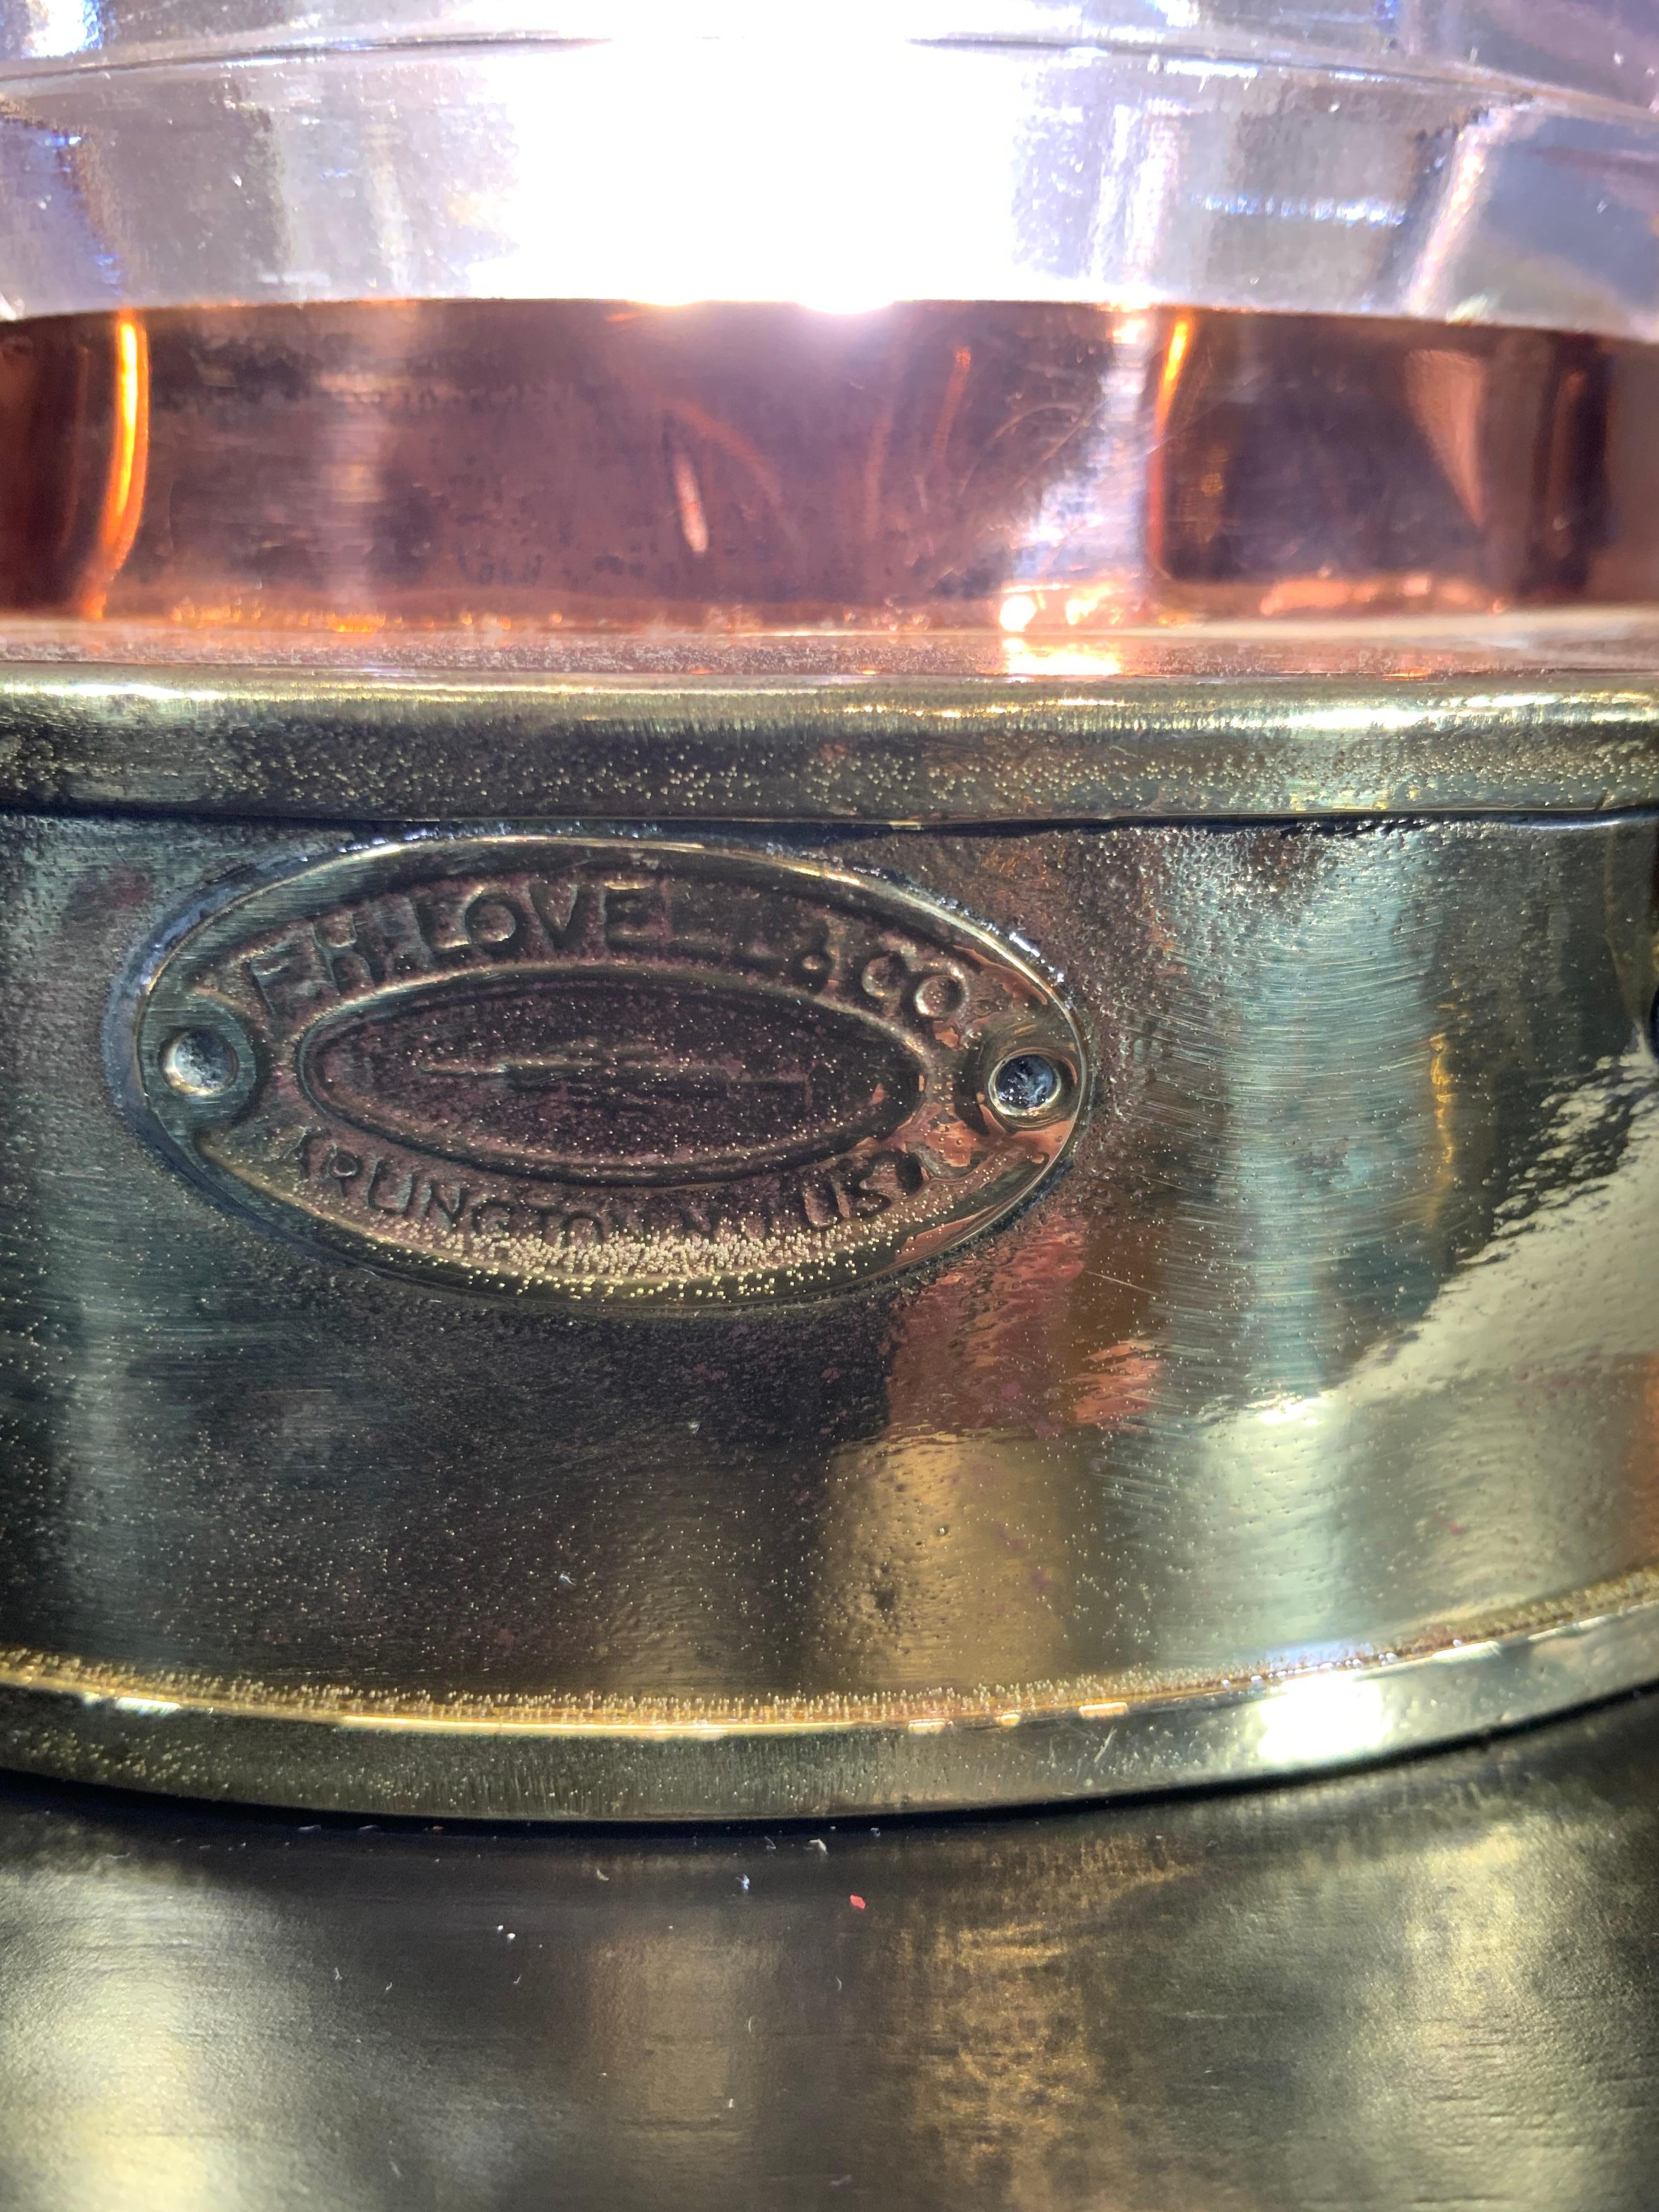 F.H. Lovell Co. Solid Brass Ships Lantern with Fresnel Glass Lens In Good Condition For Sale In Norwell, MA